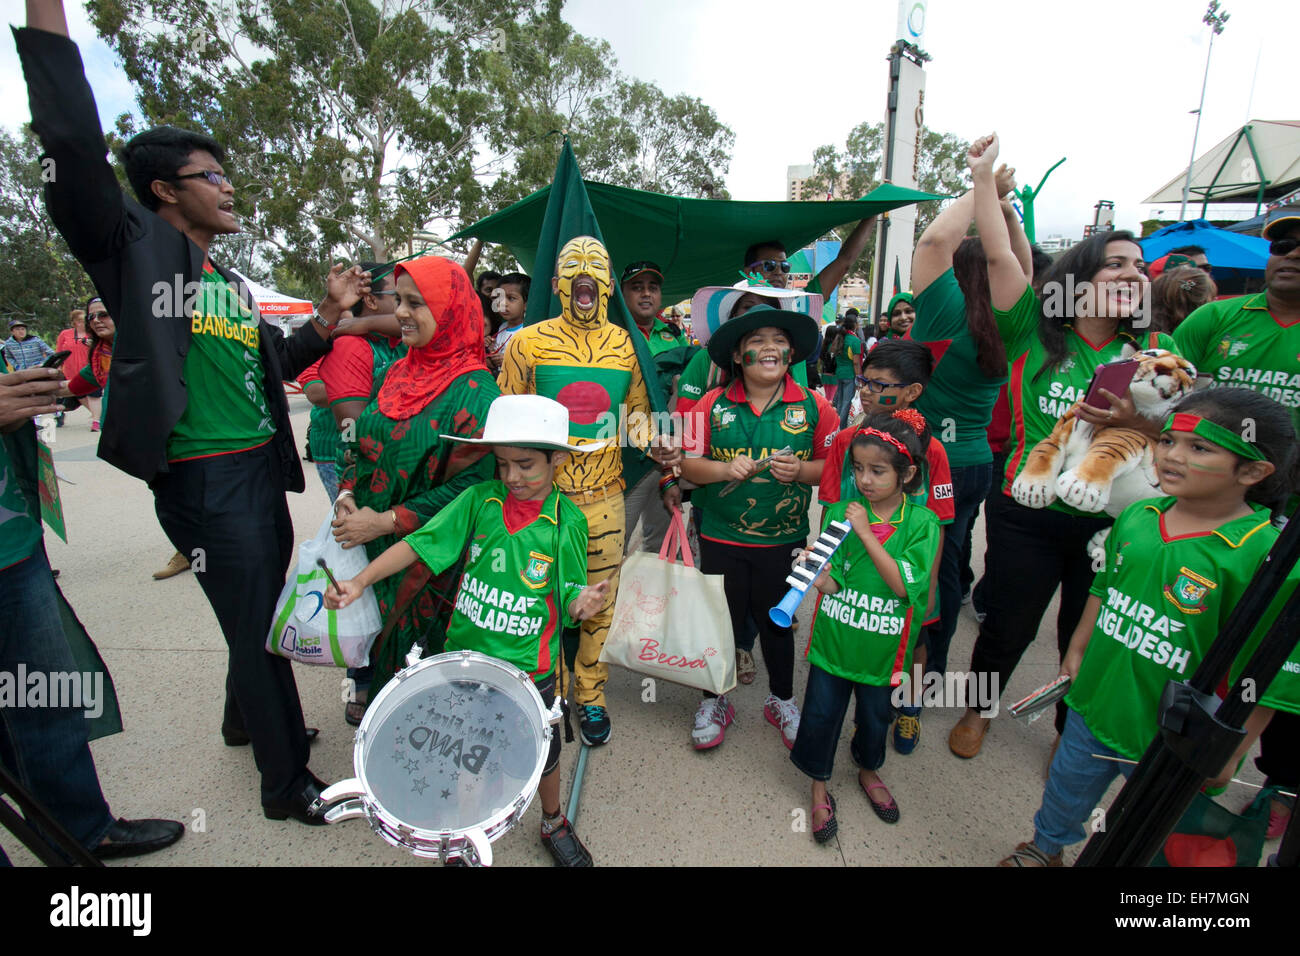 Adelaide Australia. 9th March 2015. Bangladesh cricket fans show spirit in contrast to the Barmy Army fans ahead  of the England v Bangladesh ICC world Cricket match at the Adelaide Oval Credit:  amer ghazzal/Alamy Live News Stock Photo